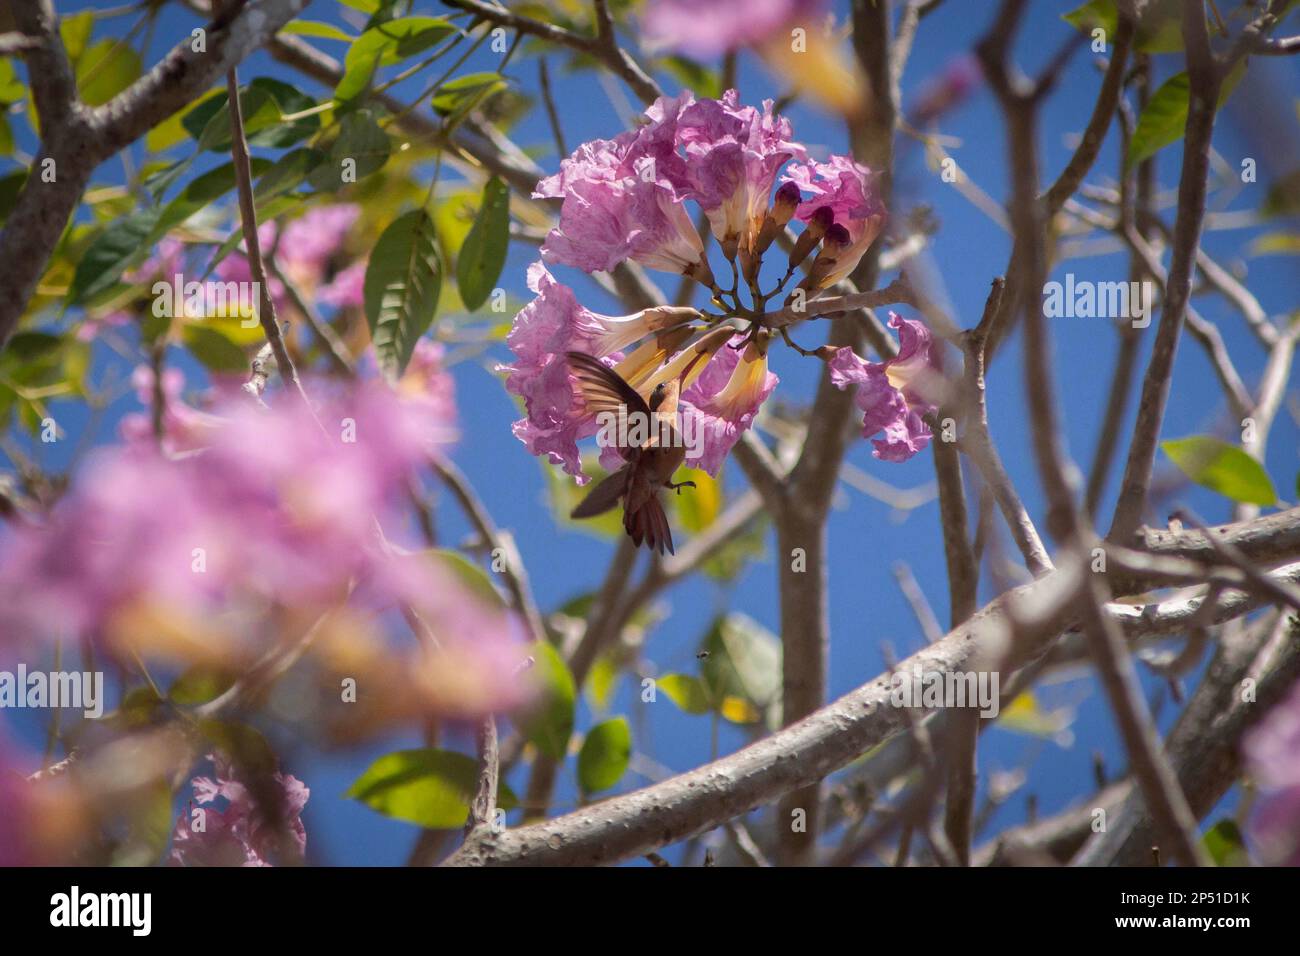 February 7, 2019, Yucatan, Mexico: Cinnamon Hummingbird feeds on the nectar of the flowers of the maculis tree. on February 7, 2019 in Yucatan, Mexico Stock Photo